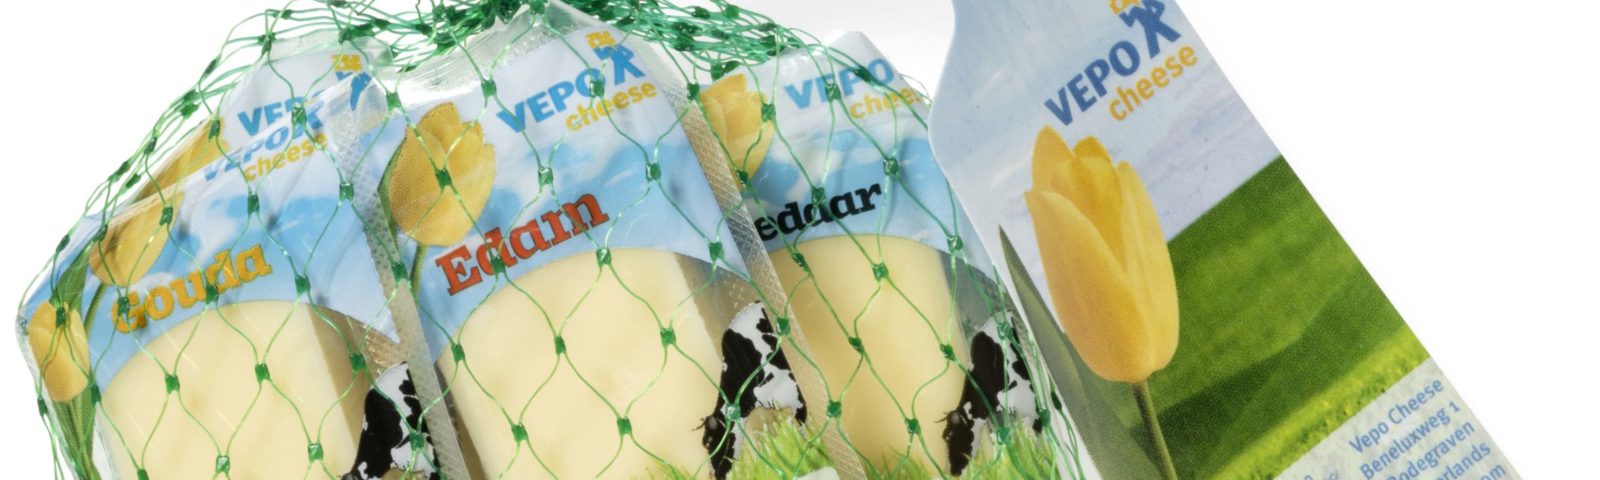 Edam cheese portions 20g